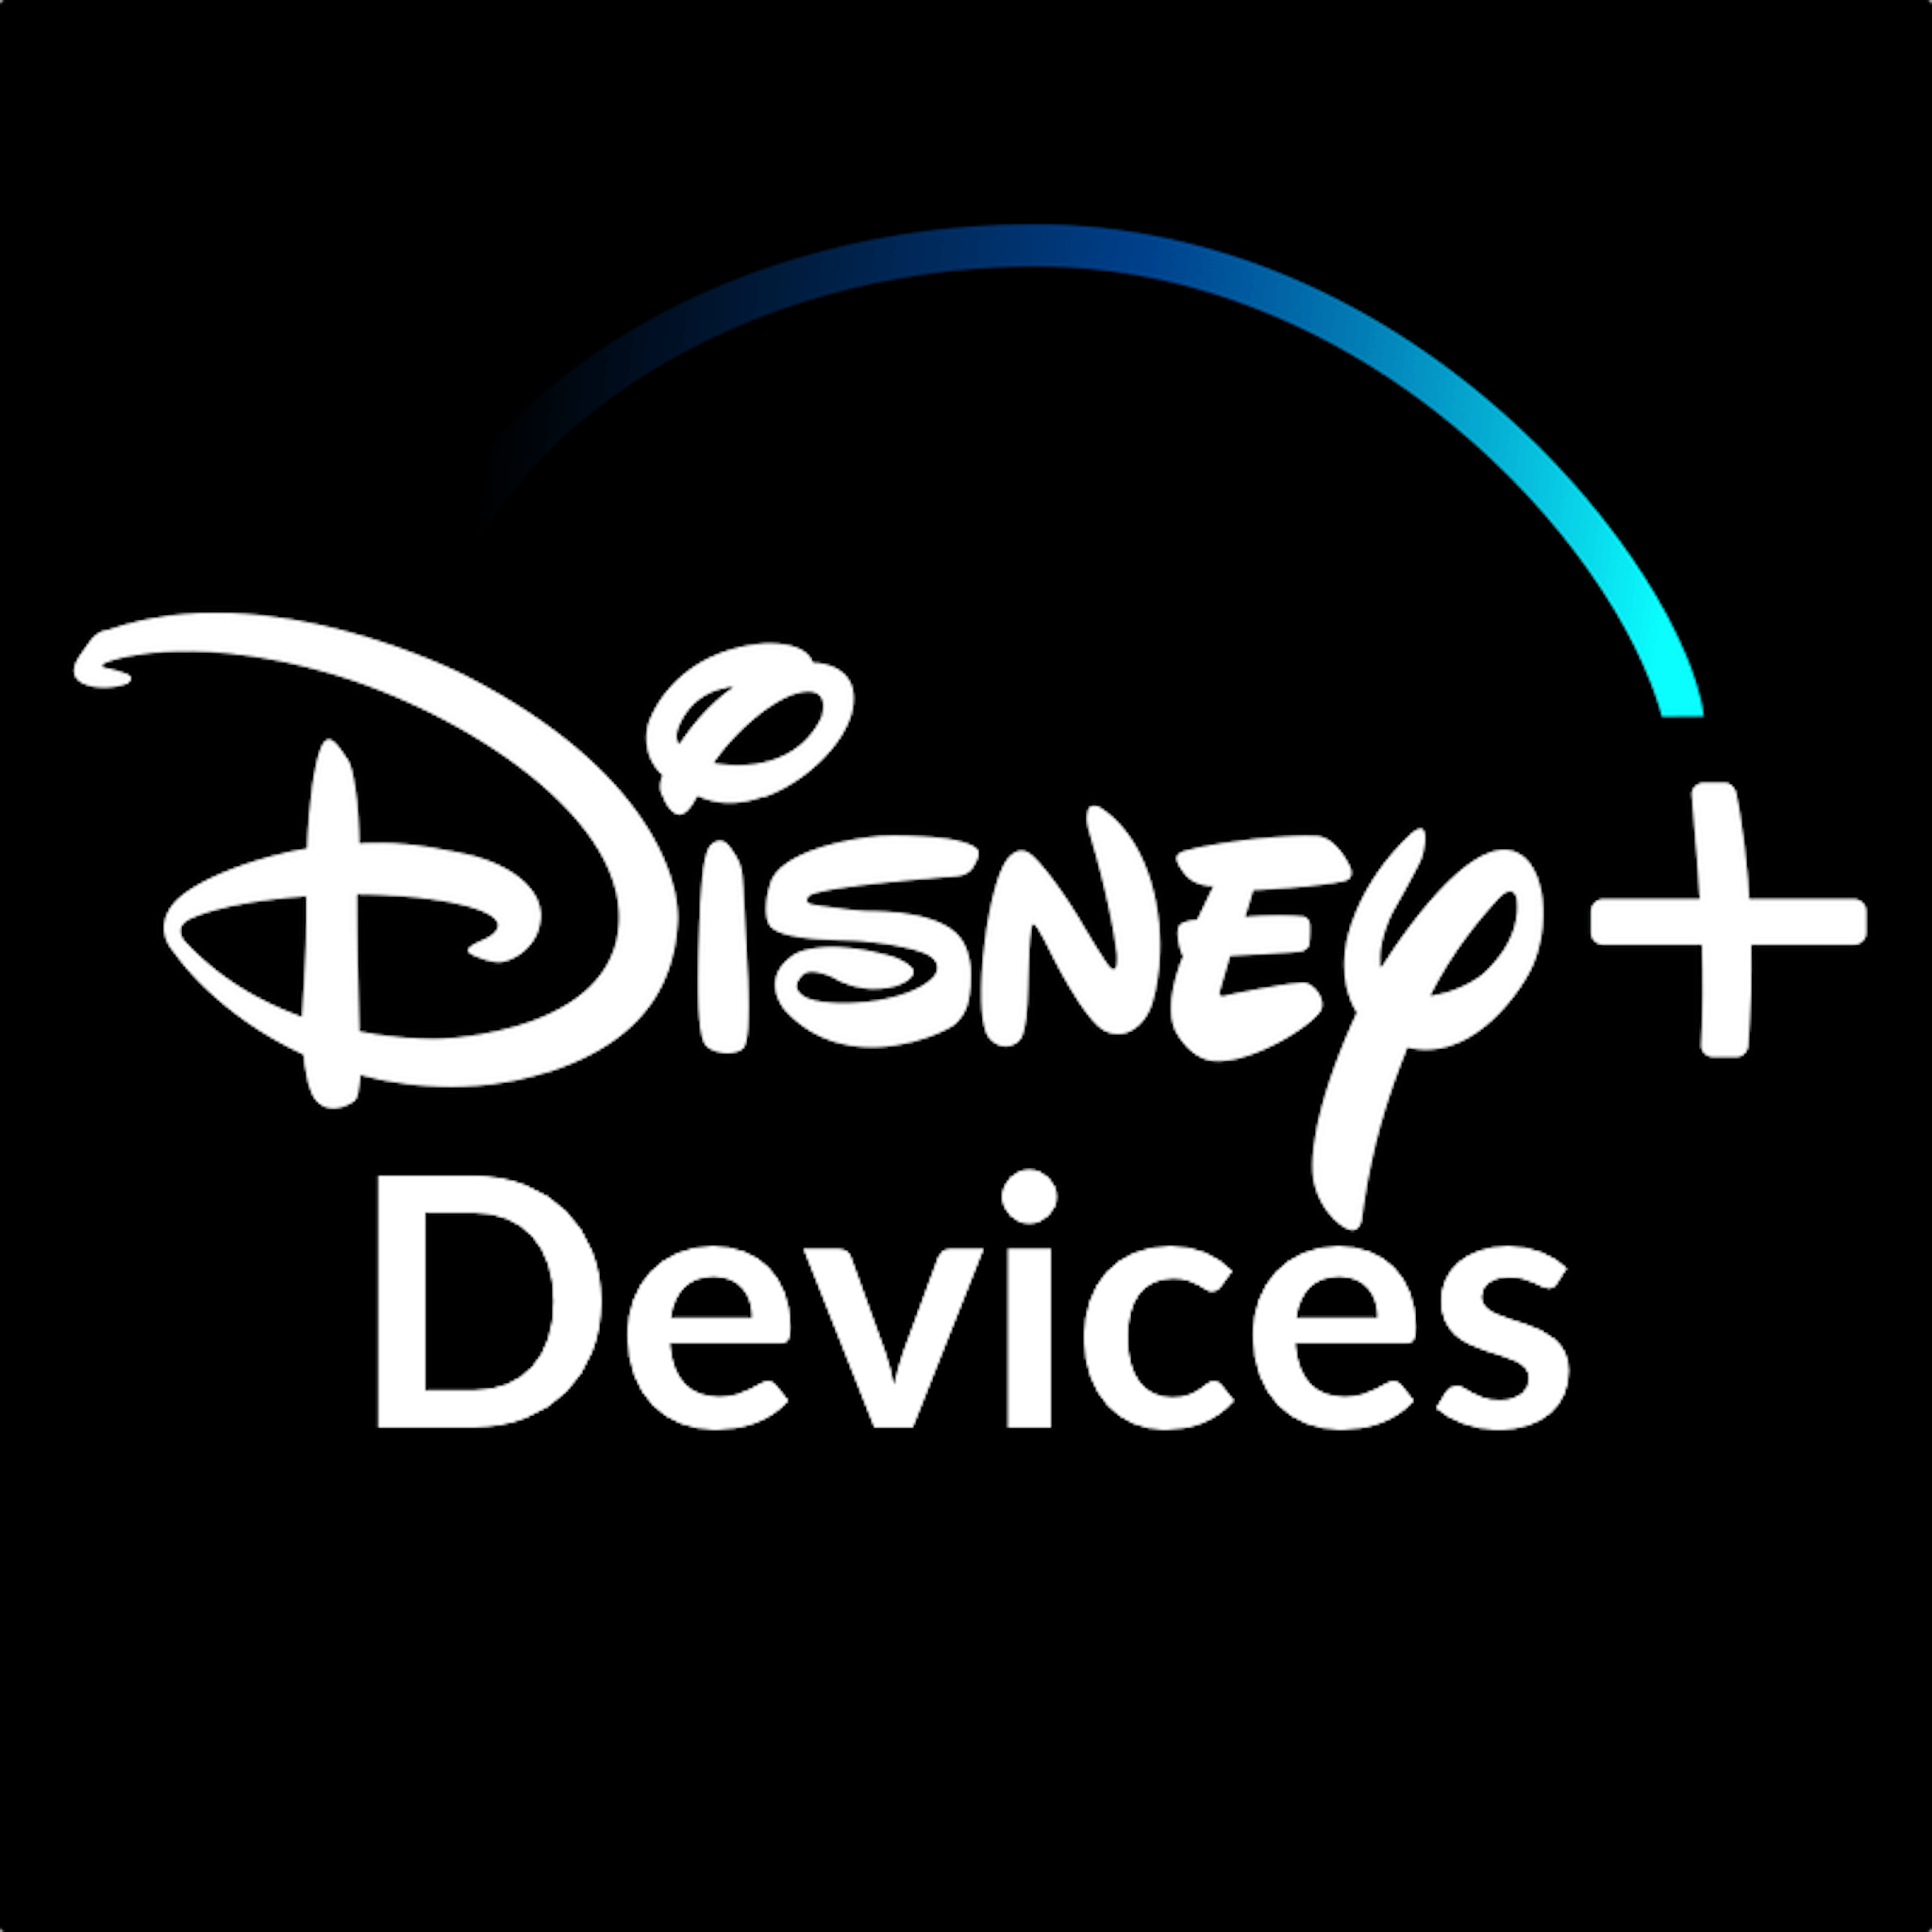 Disney Plus on Amazon Fire: How to watch Disney+ on Fire TV Devices